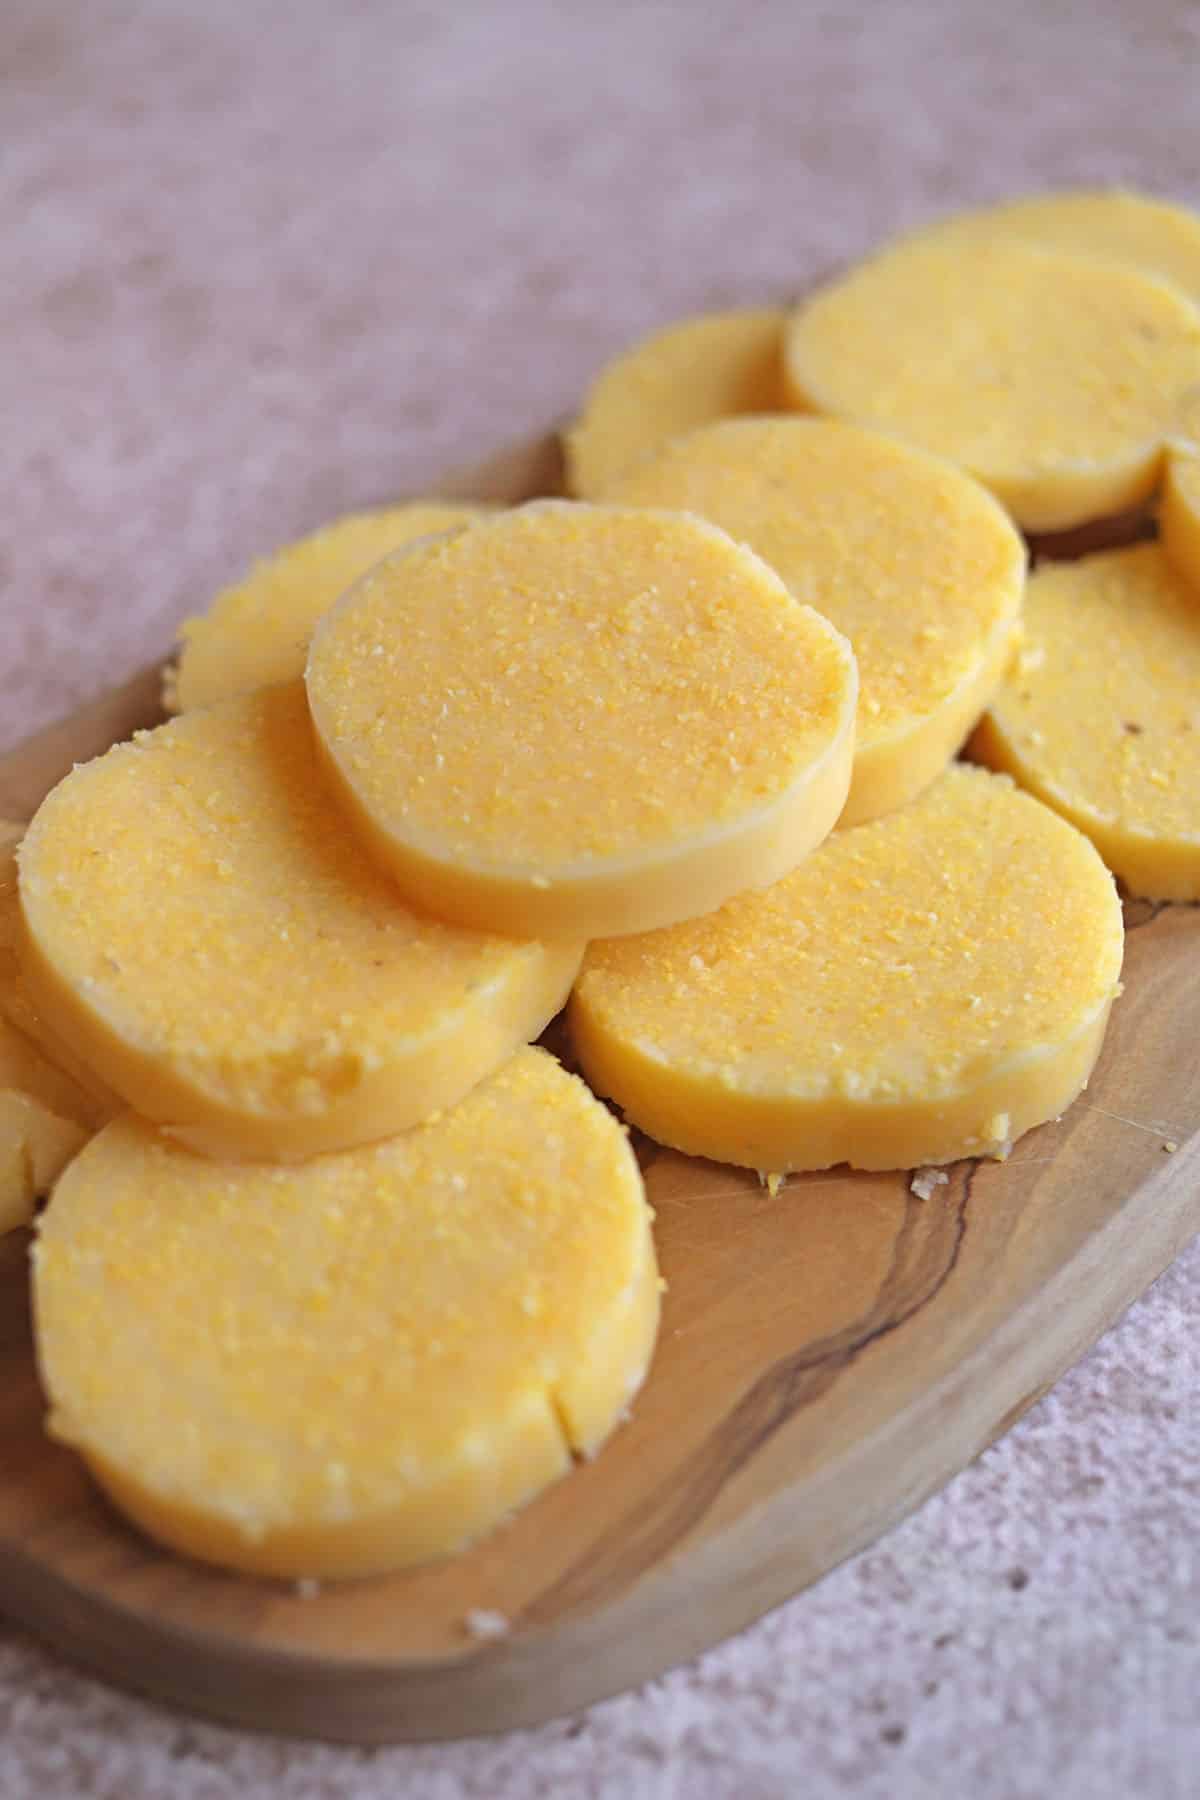 Rounds of polenta from tube on cutting board.